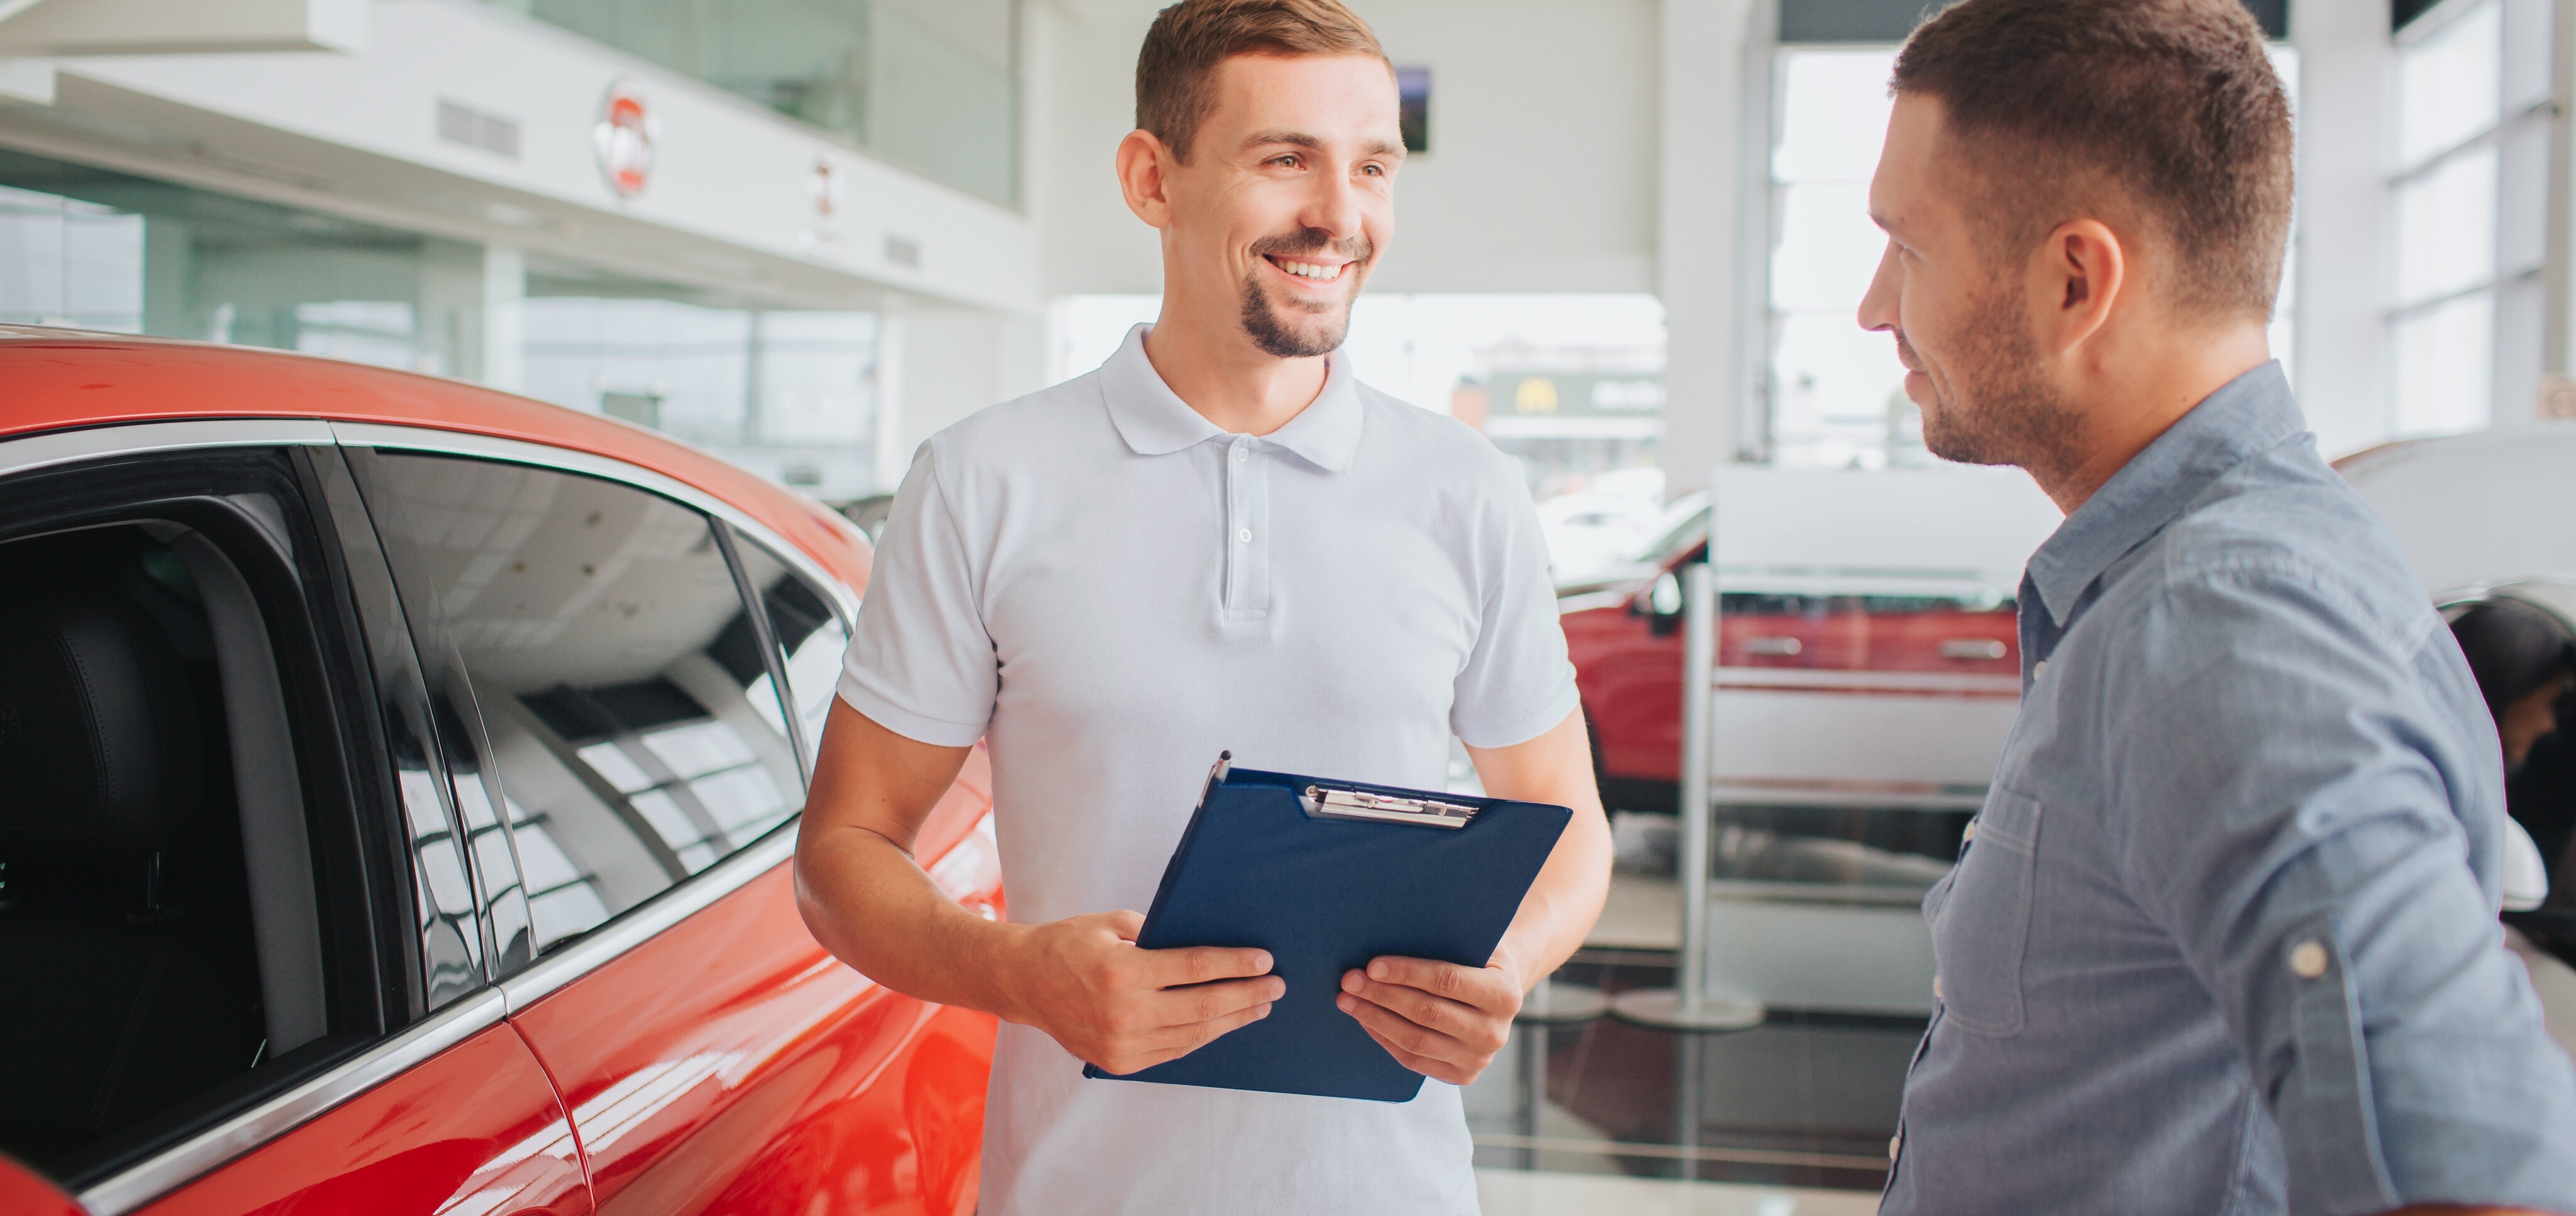 Ask Our Expert Honda Technicians Any Honda-Related Question